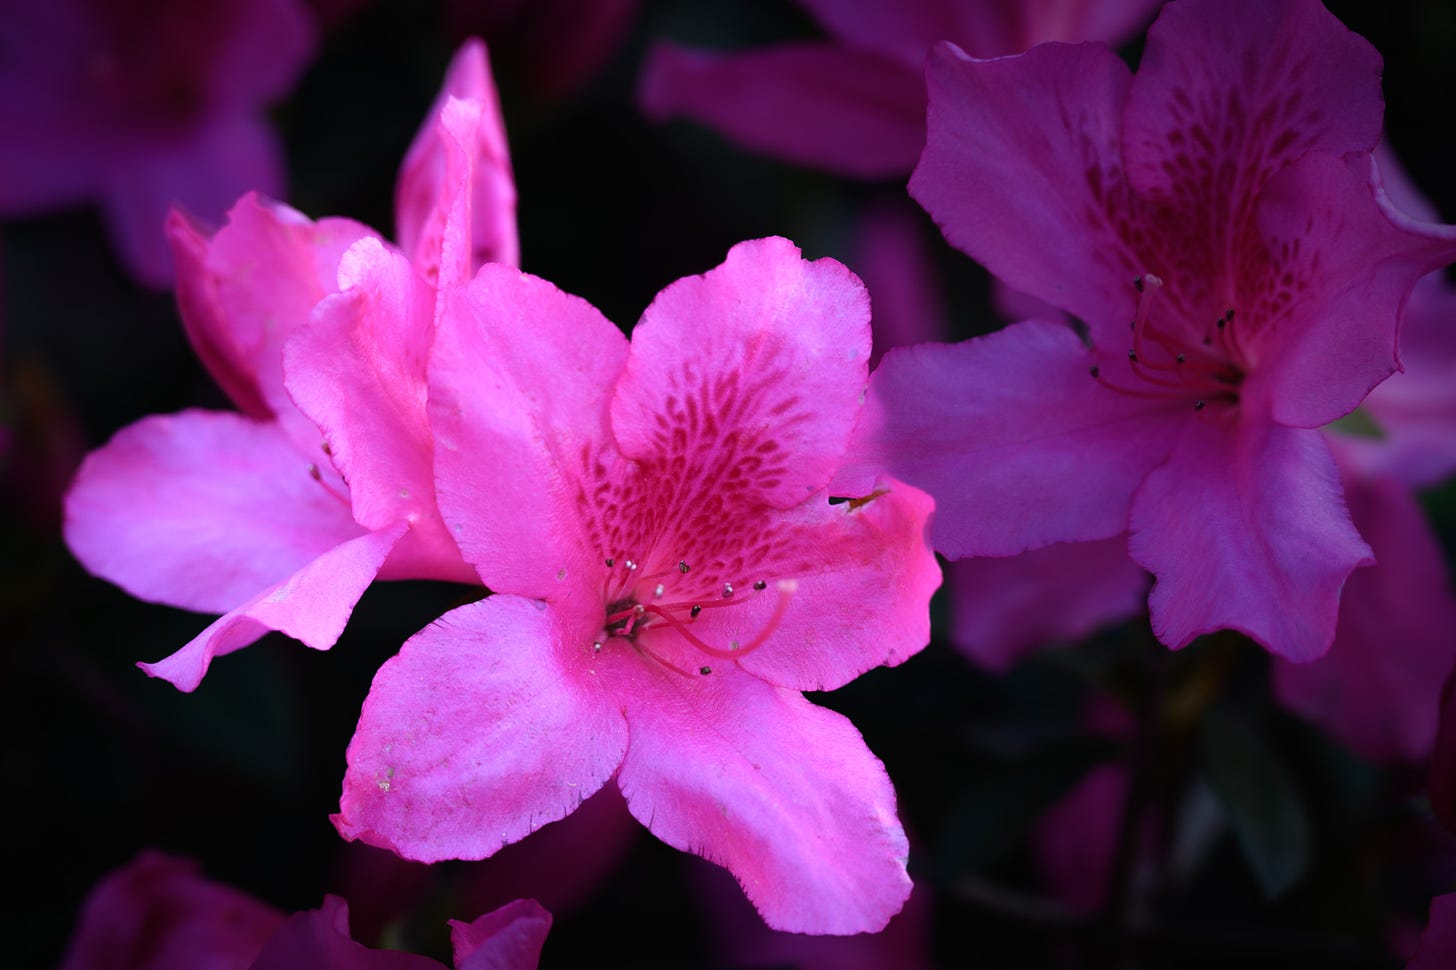 Pink azaleas highlighted with more in the darkened background